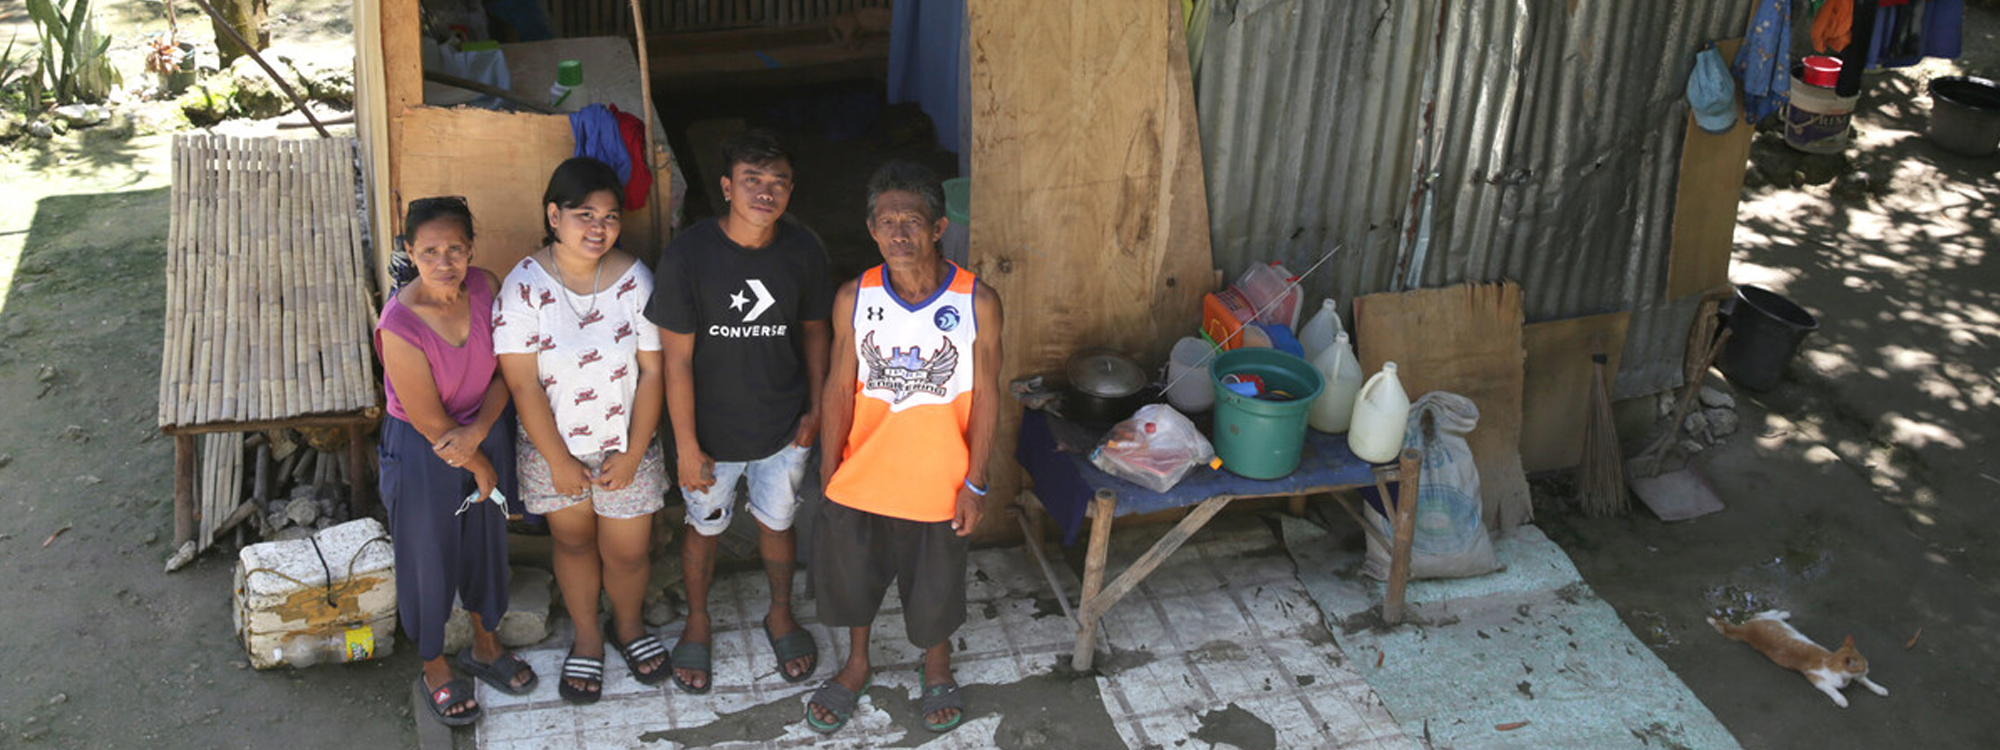 A family of four standing outside their home in the Philippines